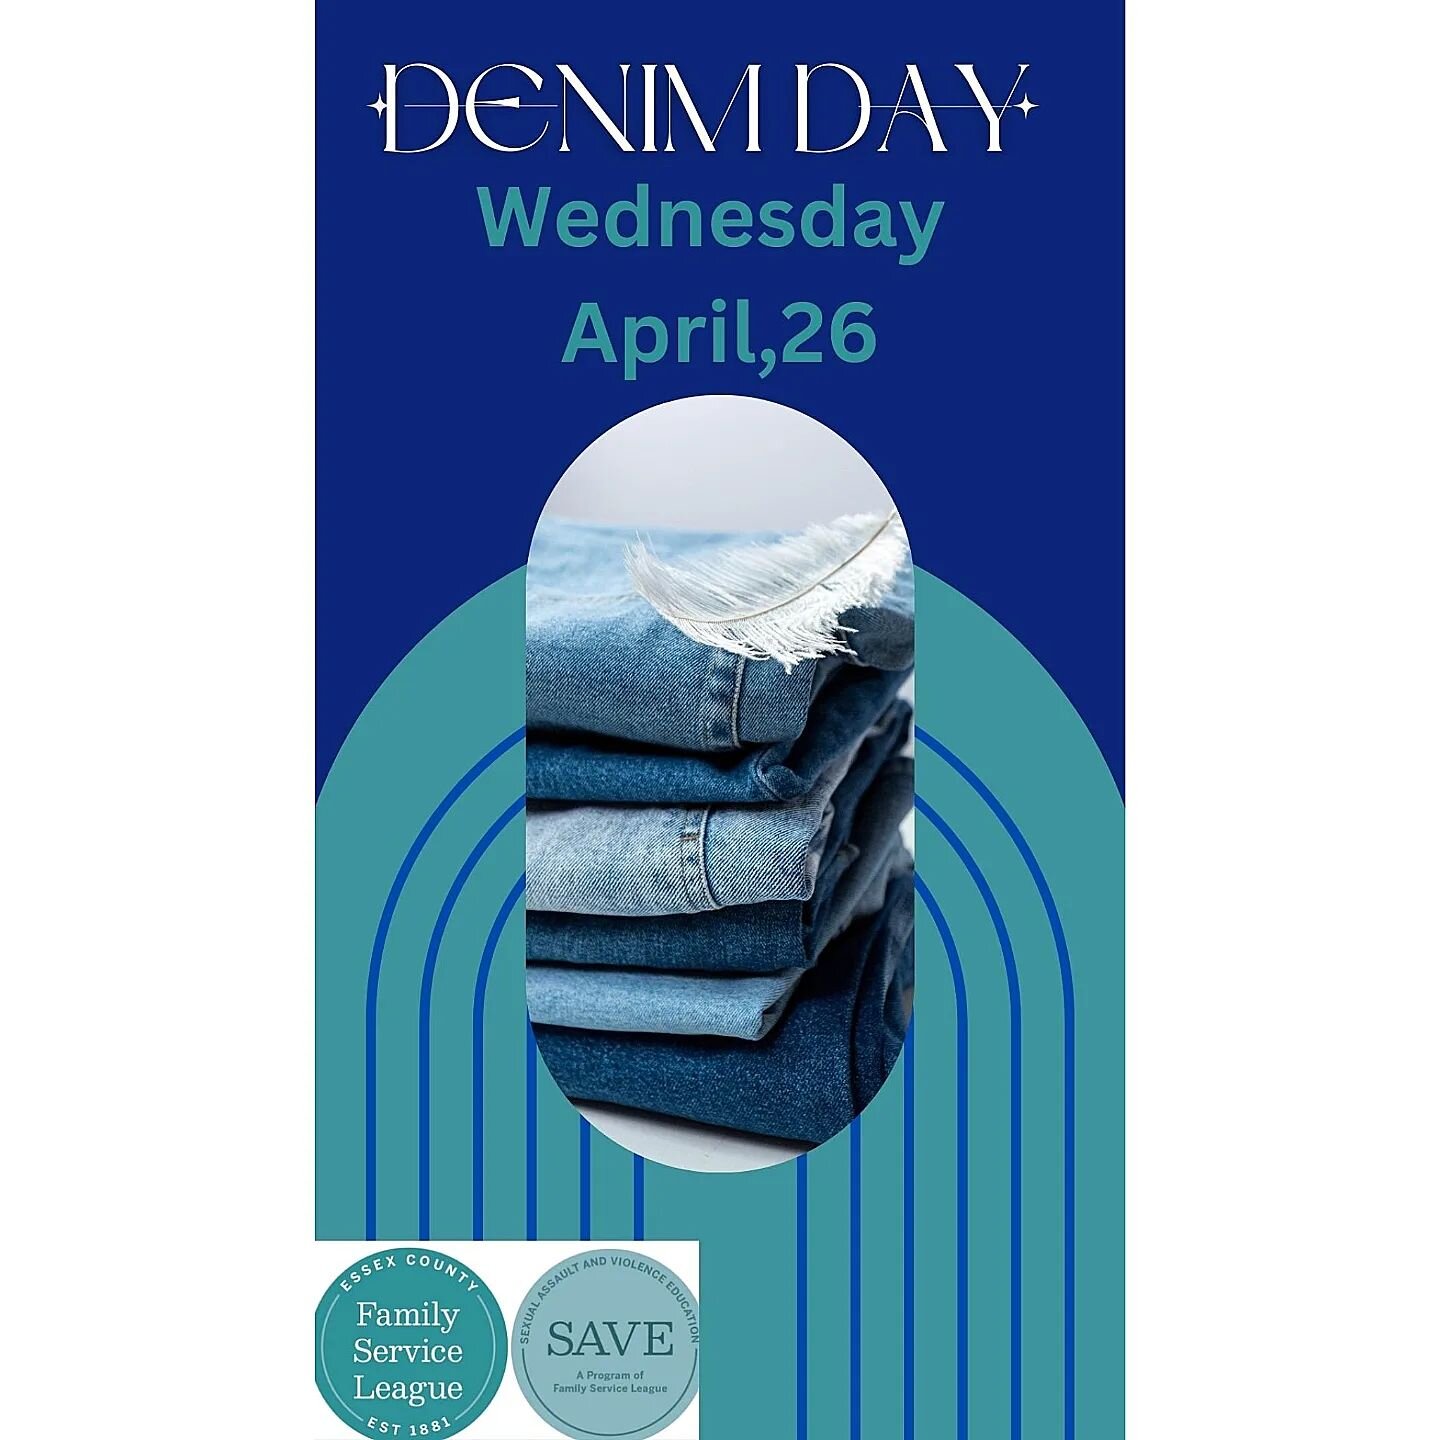 Tomorrow is Denim Day! Denim day is a day of Action and Awareness in which people across the world wear denim in solidarity with survivors and promote awareness of Sexual Violence. Join the movement tomorrow to demand an end to sexual violence. 
#SAV